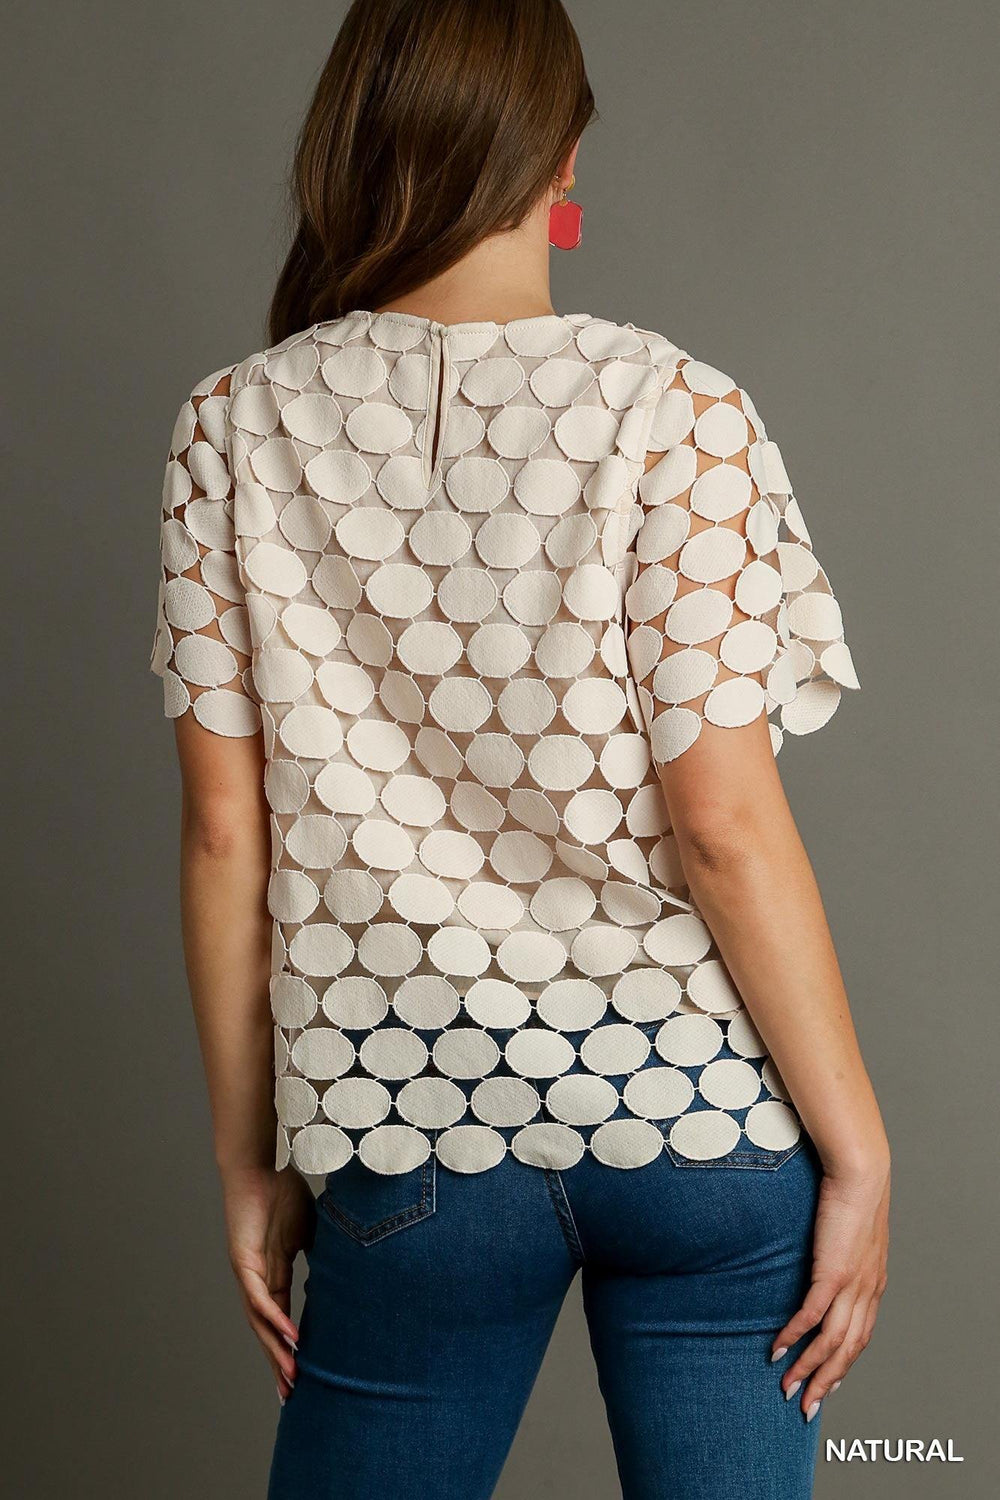 Polka Dot Lace Shift Boxy Cut Short Sleeve Top with Back Button Keyhole